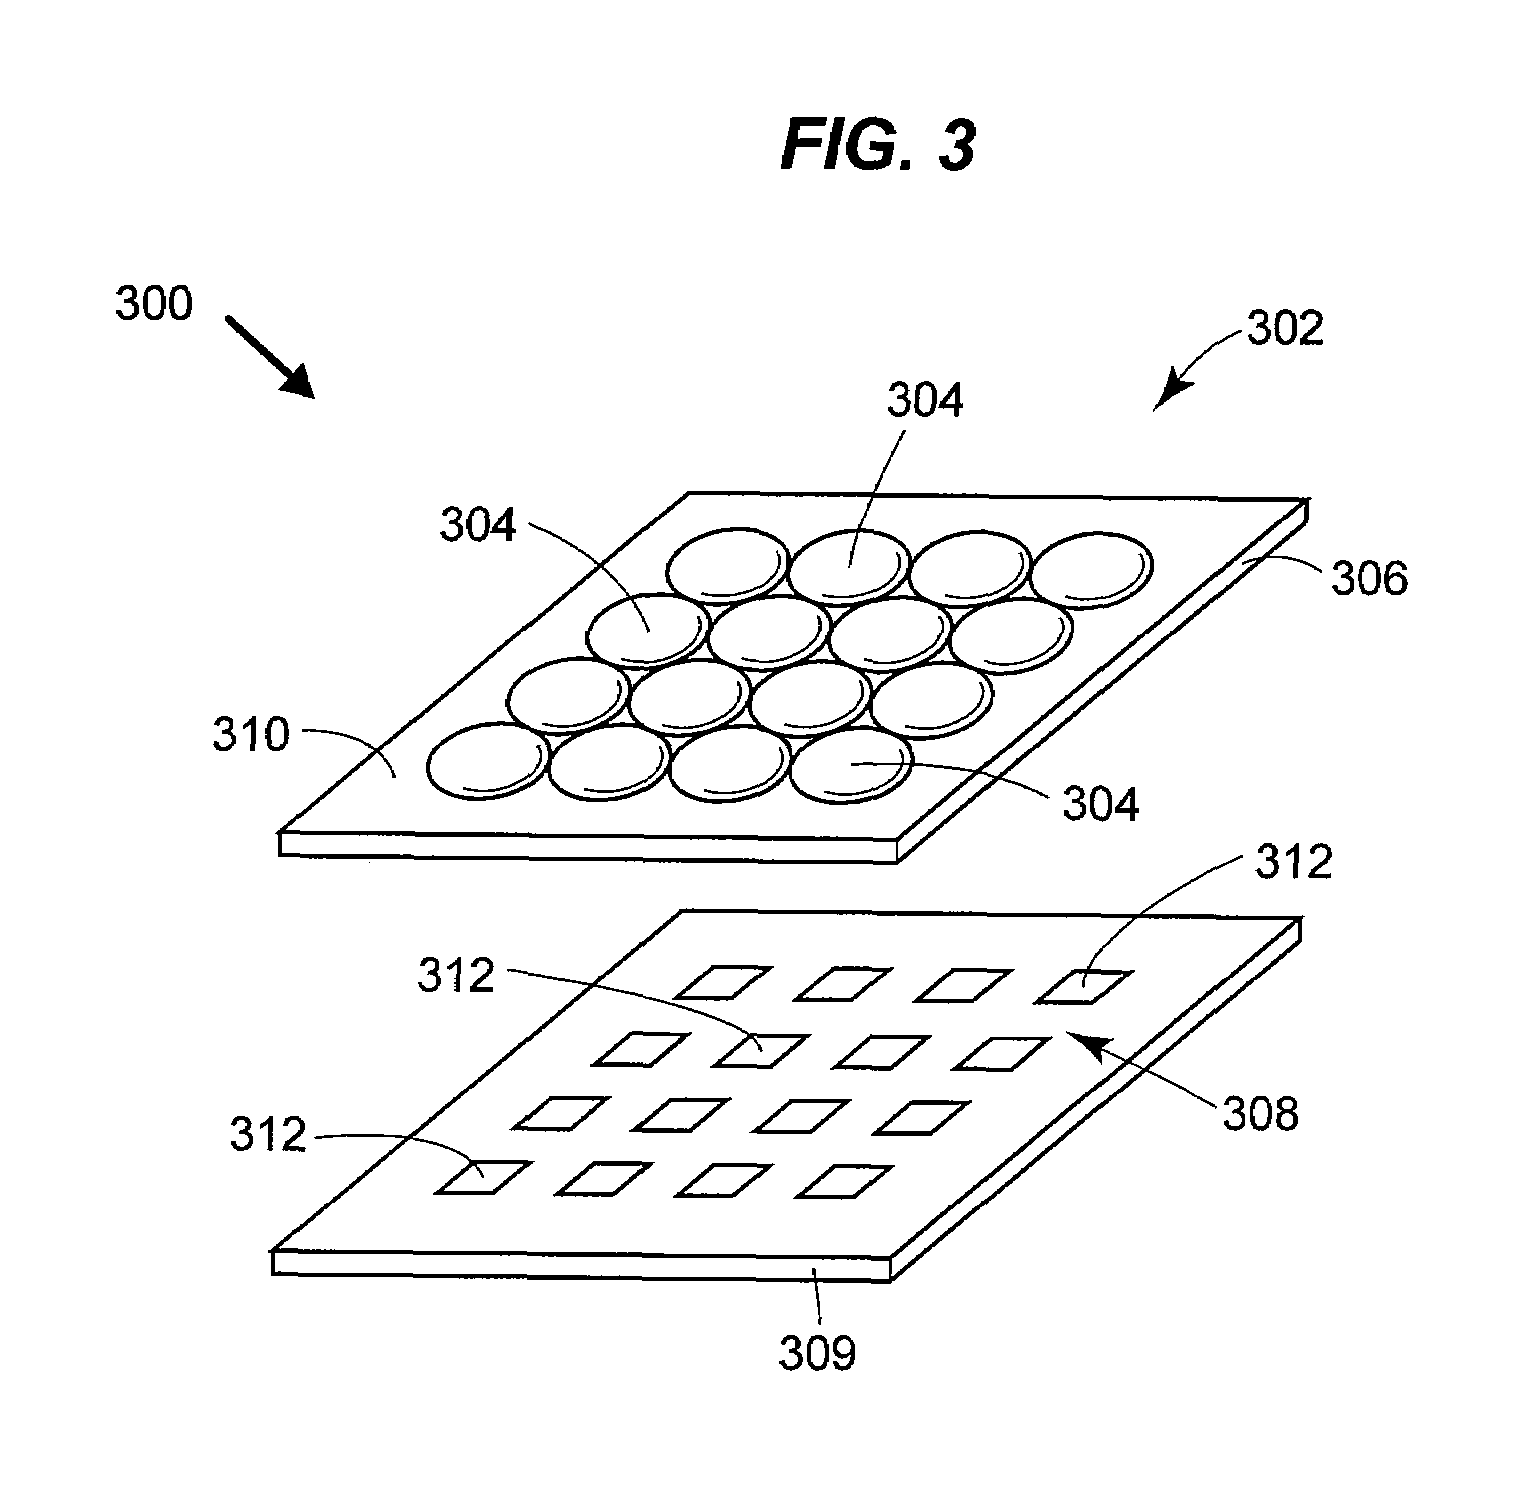 Lenslet/detector array assembly for high data rate optical communications